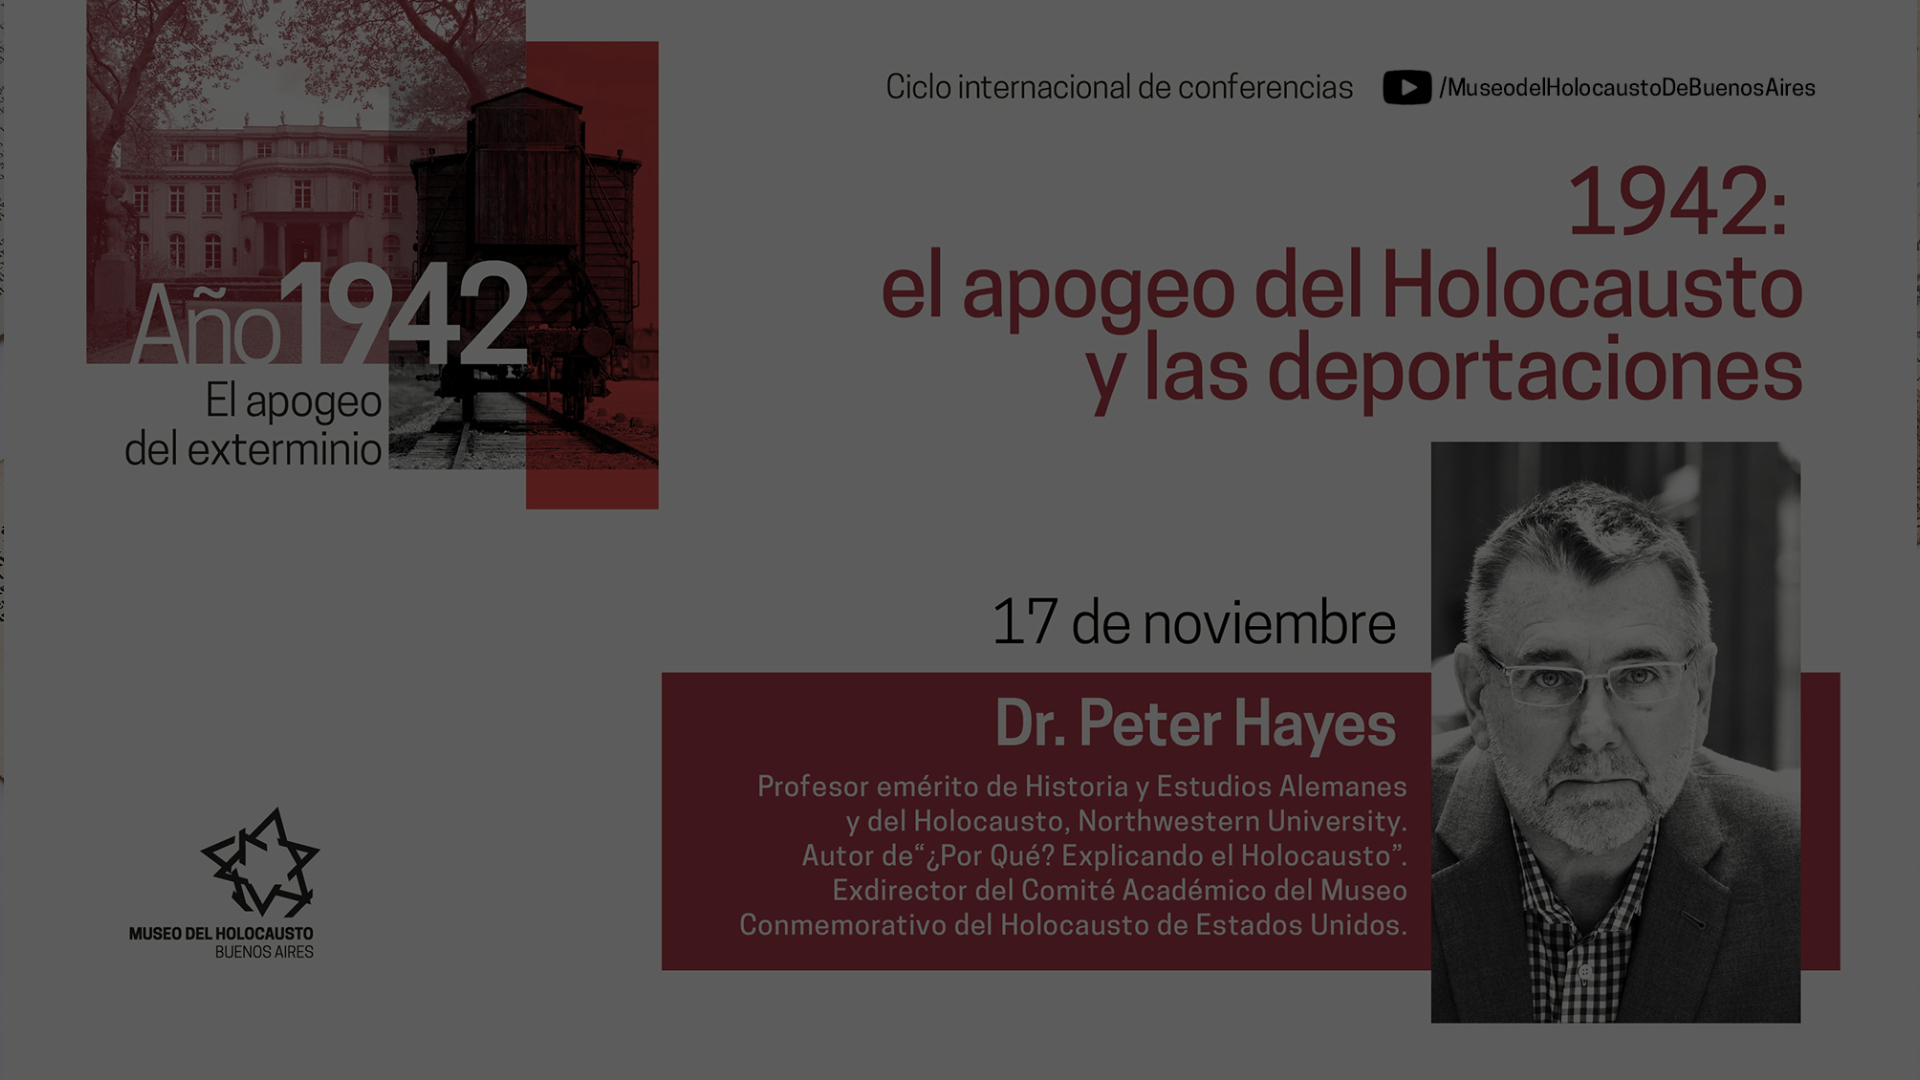 VIDEO 2 | Año 1942 | Dr. Peter Hayes | 